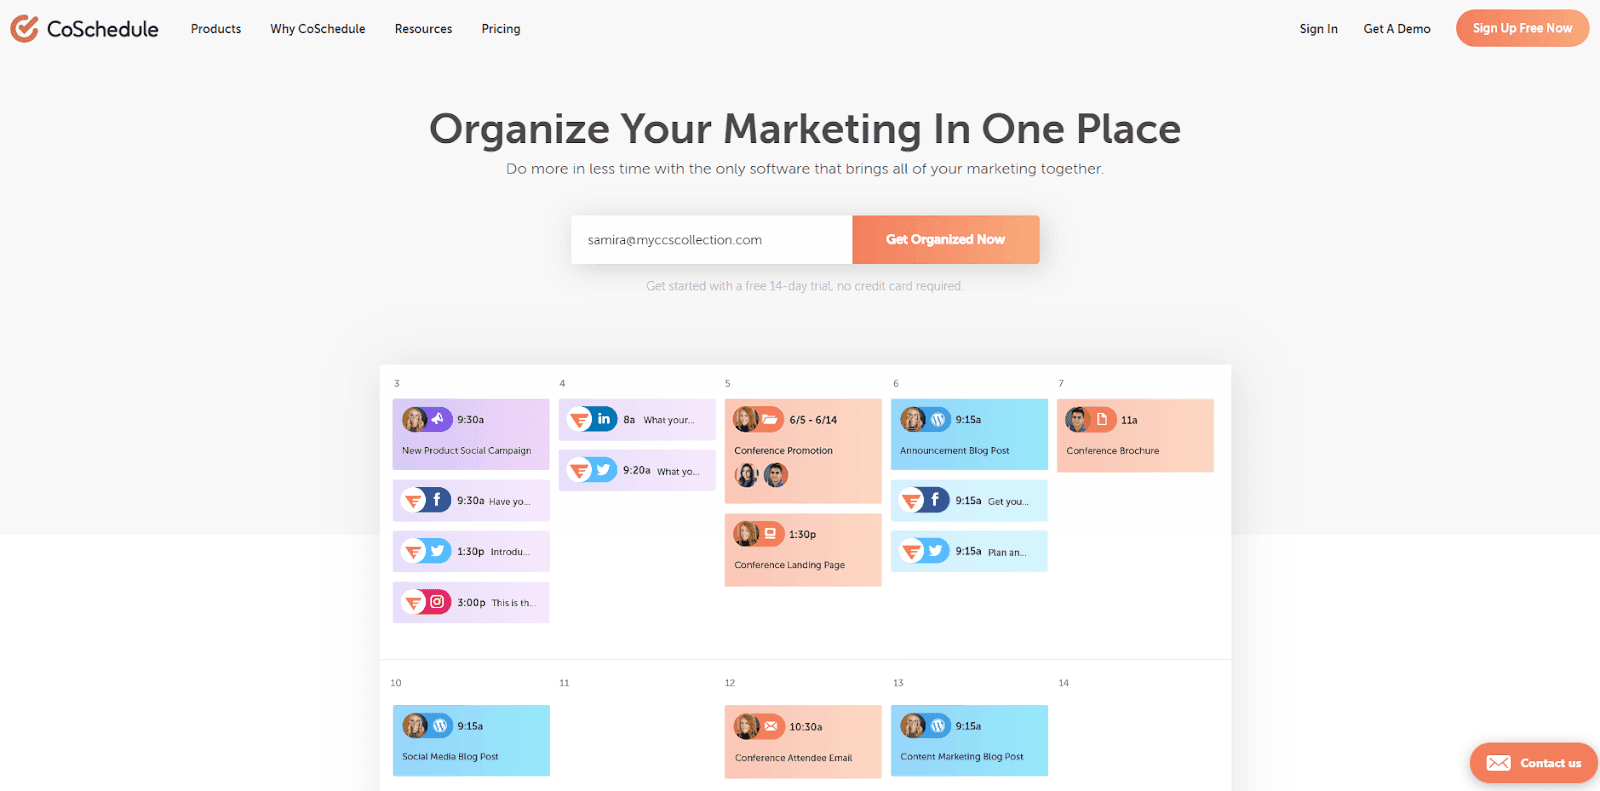 CoSchedule homepage screenshot "Organize Your Marketing In One Place"